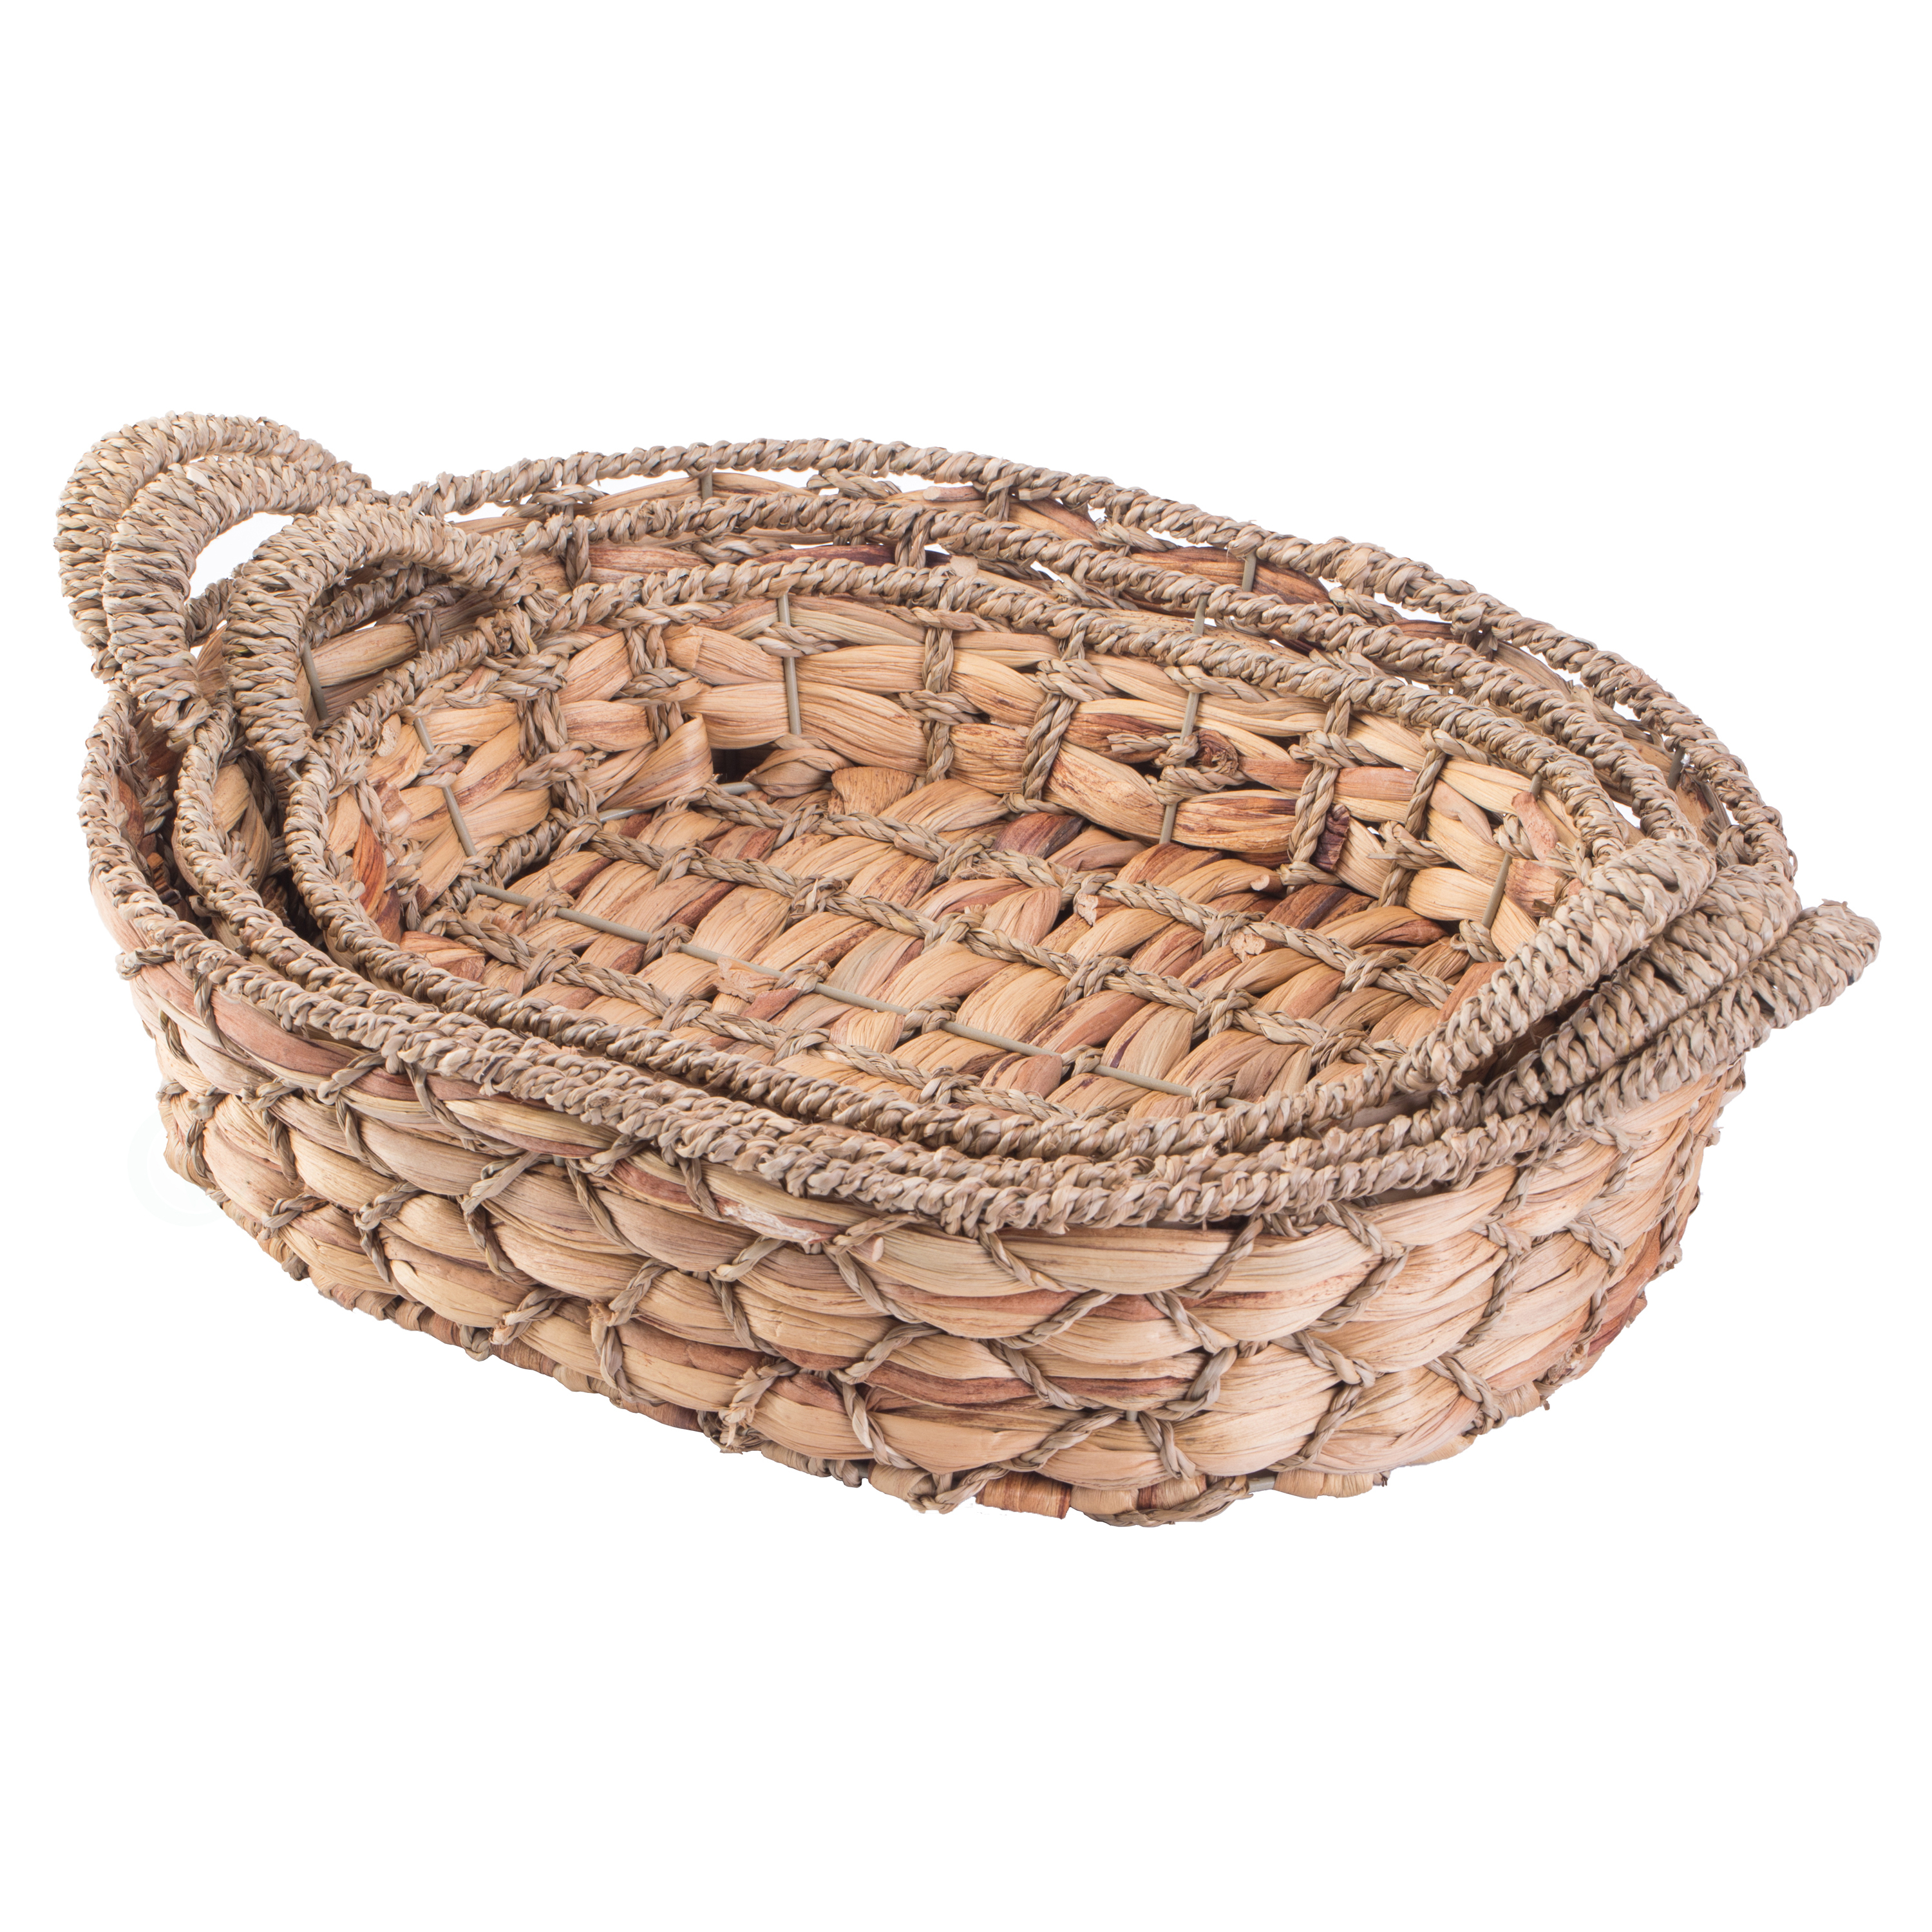 Seagrass Fruit Bread Basket Tray With Handles - Set Of 4 Medium